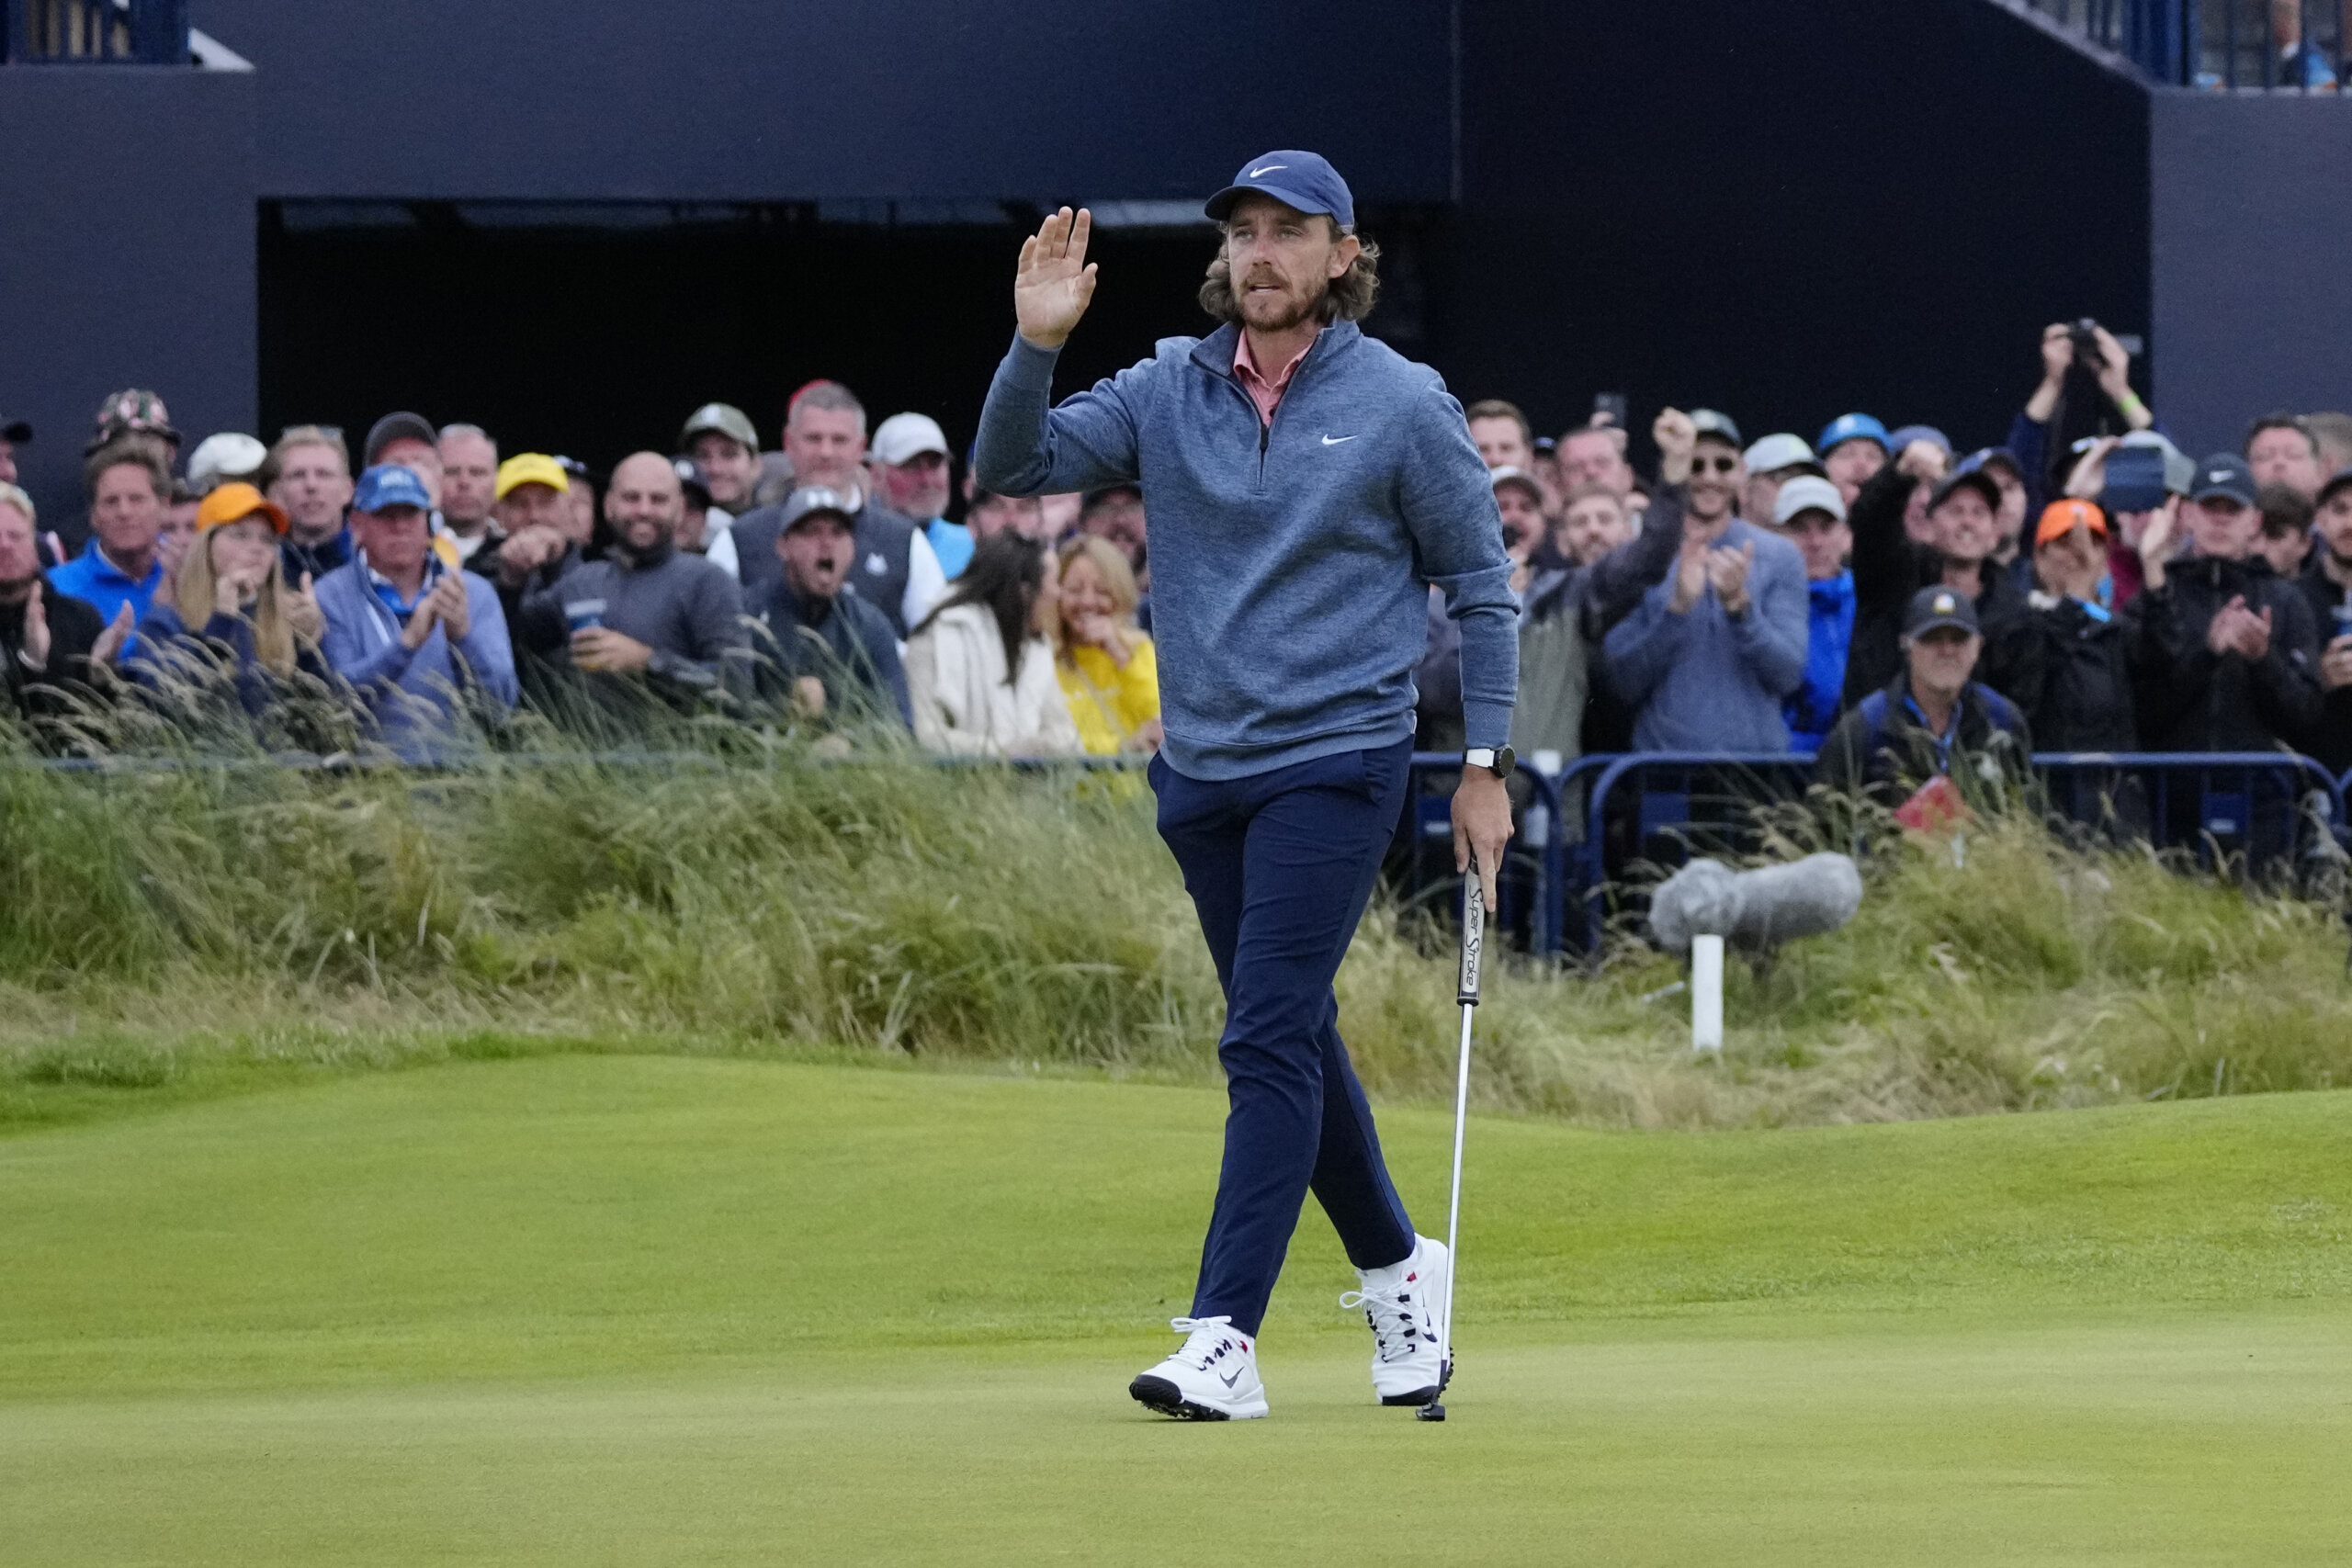 Live updates Fleetwood gets into final group 5 shots back at British Open  pic